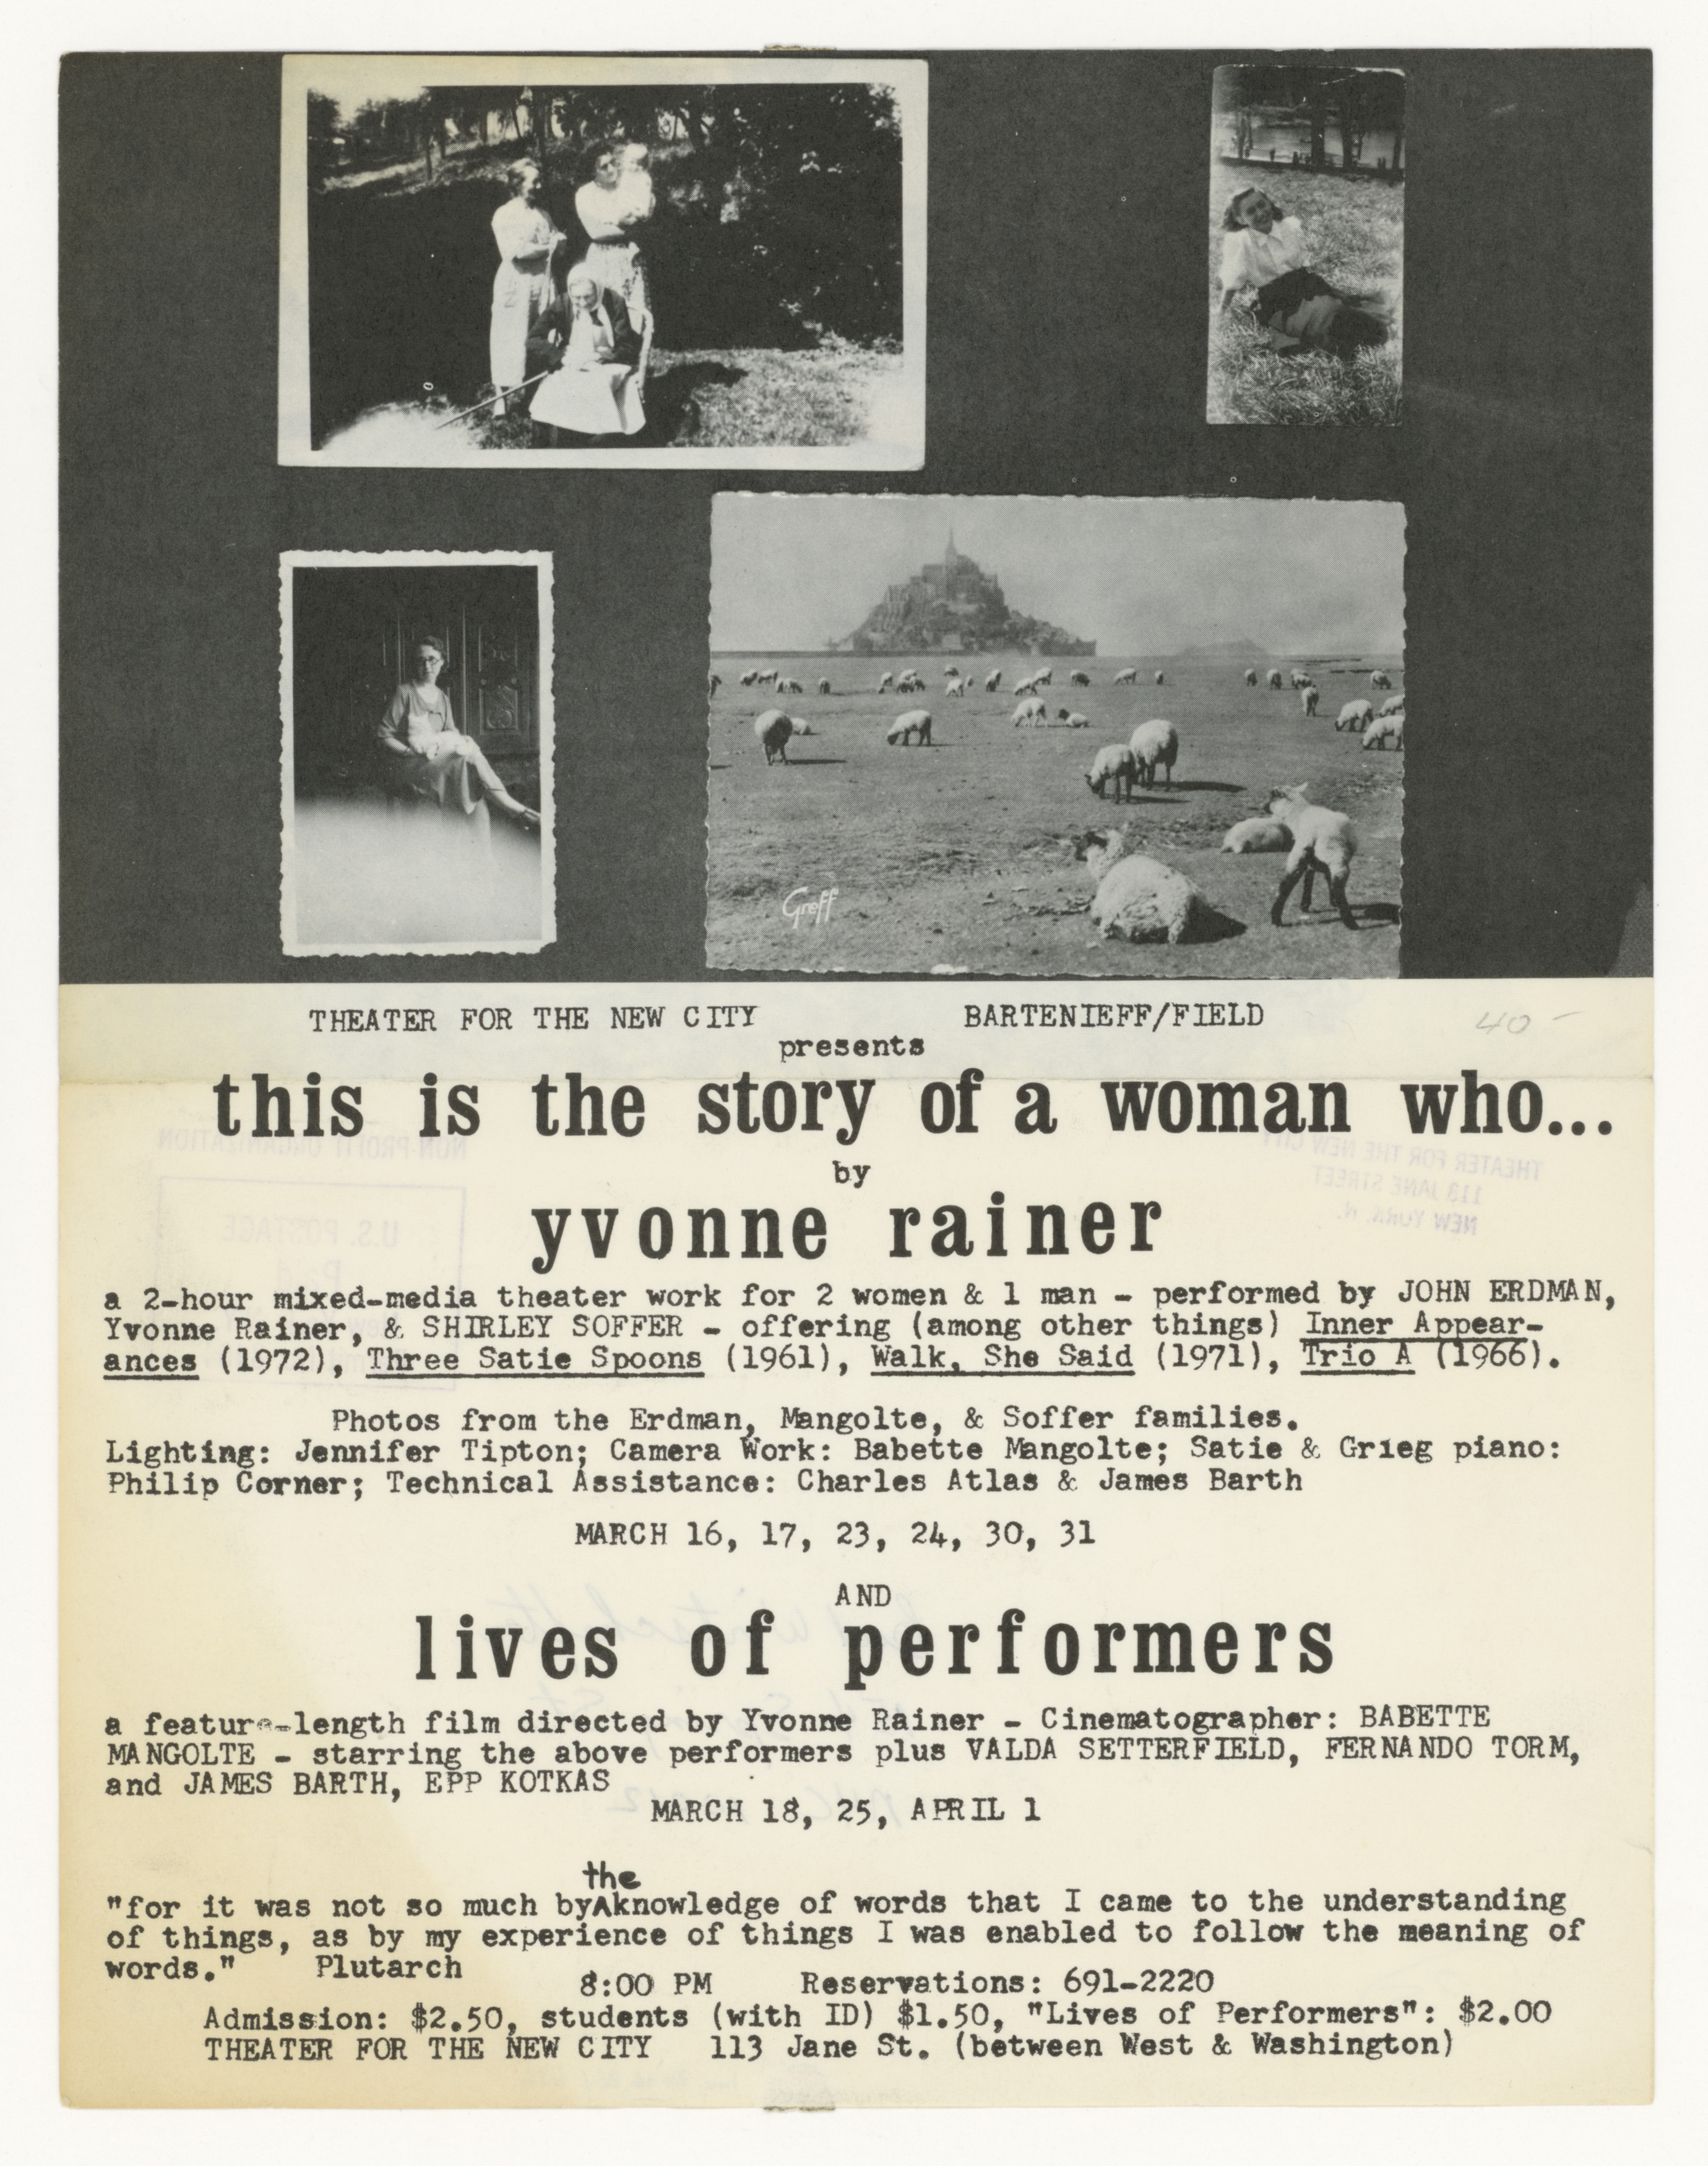 Yvonne Rainer, This is the story of a woman who..., Theater for the New City, New York, 1973 (announcement); ; Sammlung Marzona, Kunstbibliothek – Staatliche Museen zu Berlin